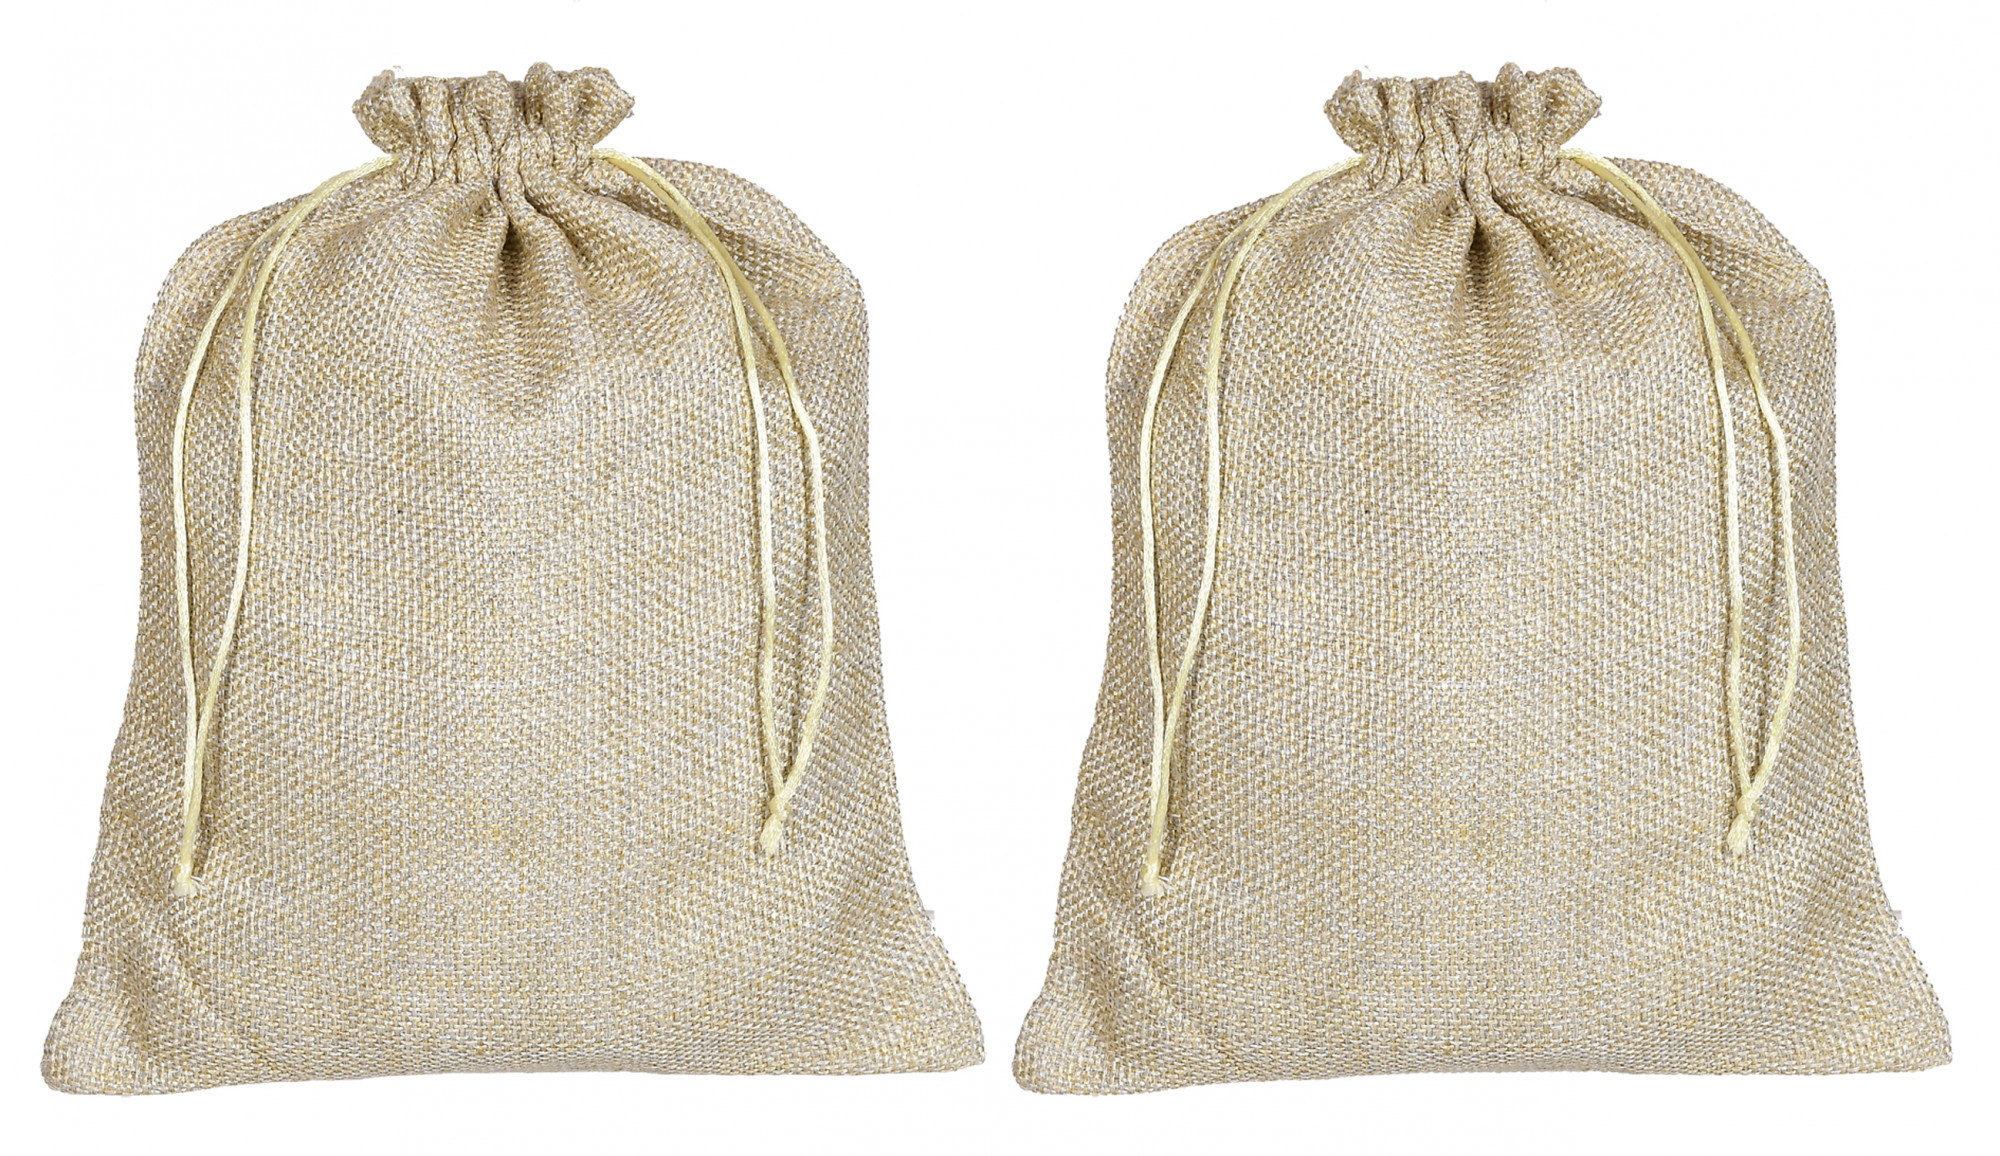 Kuber Industries Jute Medium Size Gift Bags With Drawstring For Gifts Jewelry And Storage-(Gold)